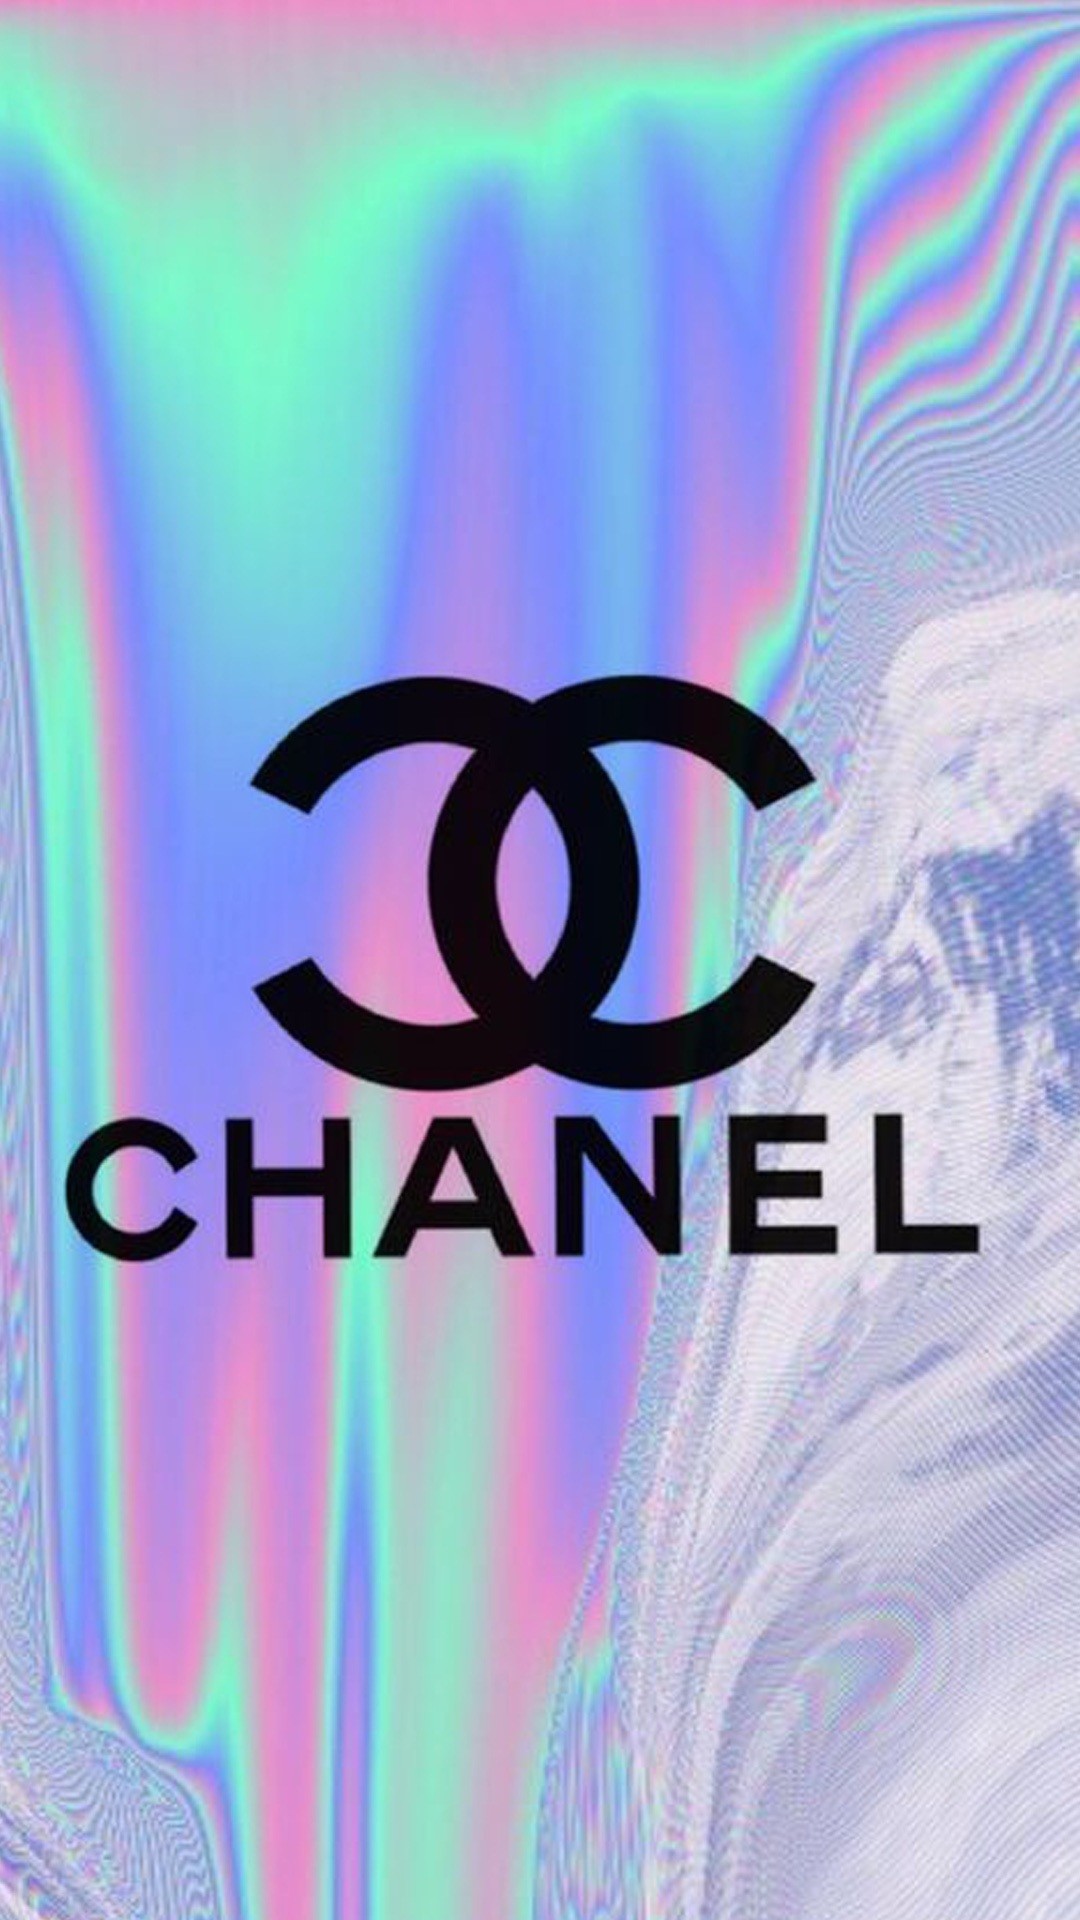 Girly Chanel Iphone Wallpaper Wallpapers For Iphone - Girly - HD Wallpaper 